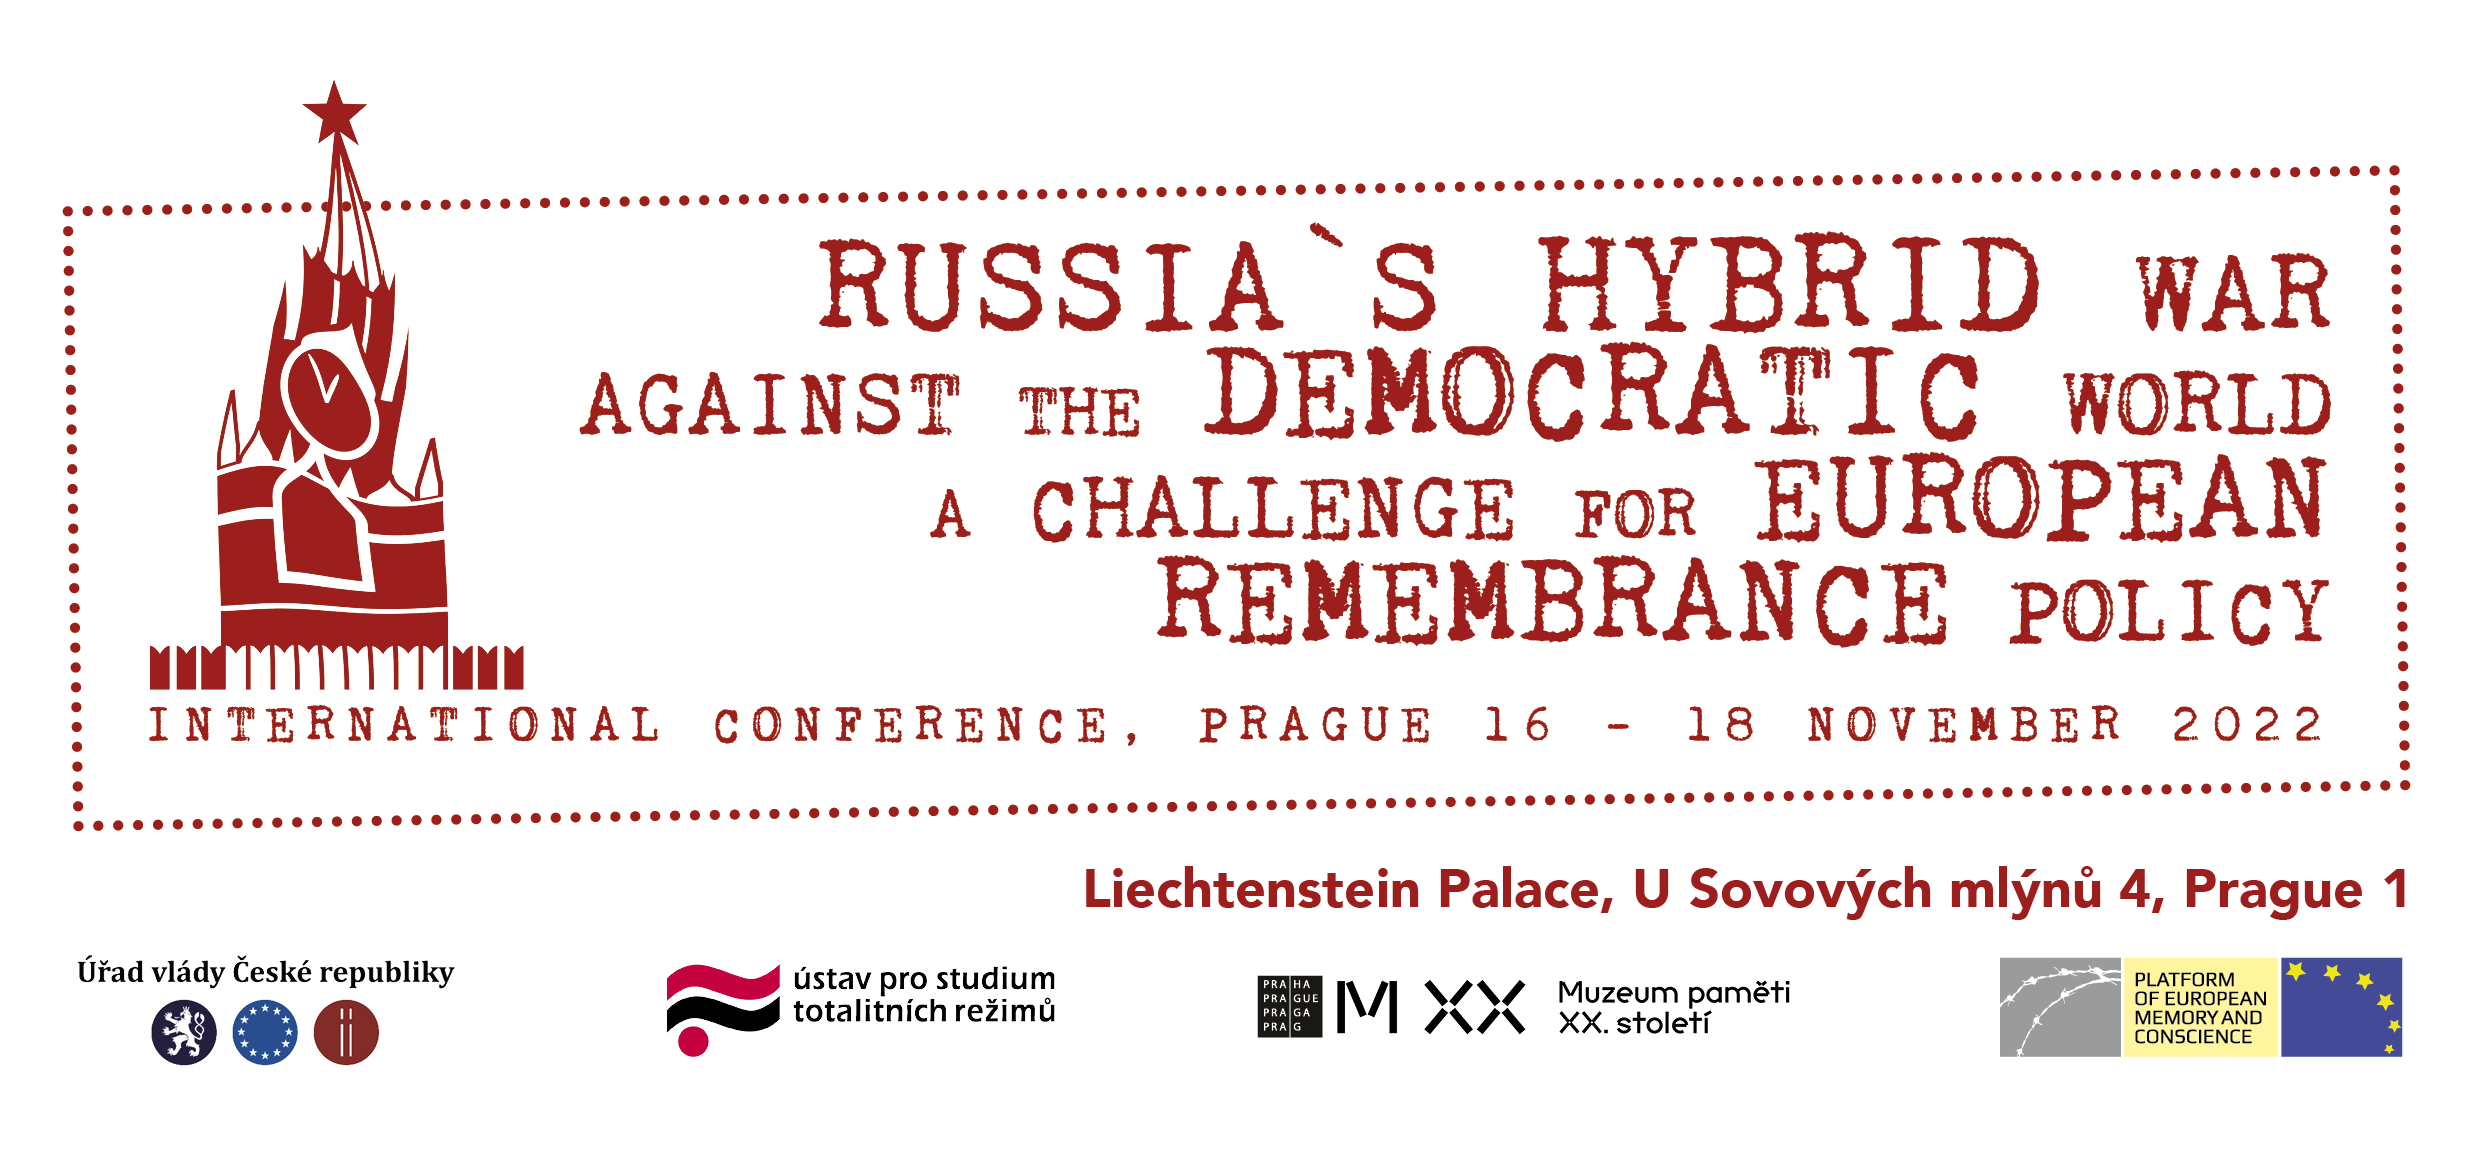 Russia’s Hybrid War against the Democratic World. A Challenge for European Remembrance Policy - conference in Prague